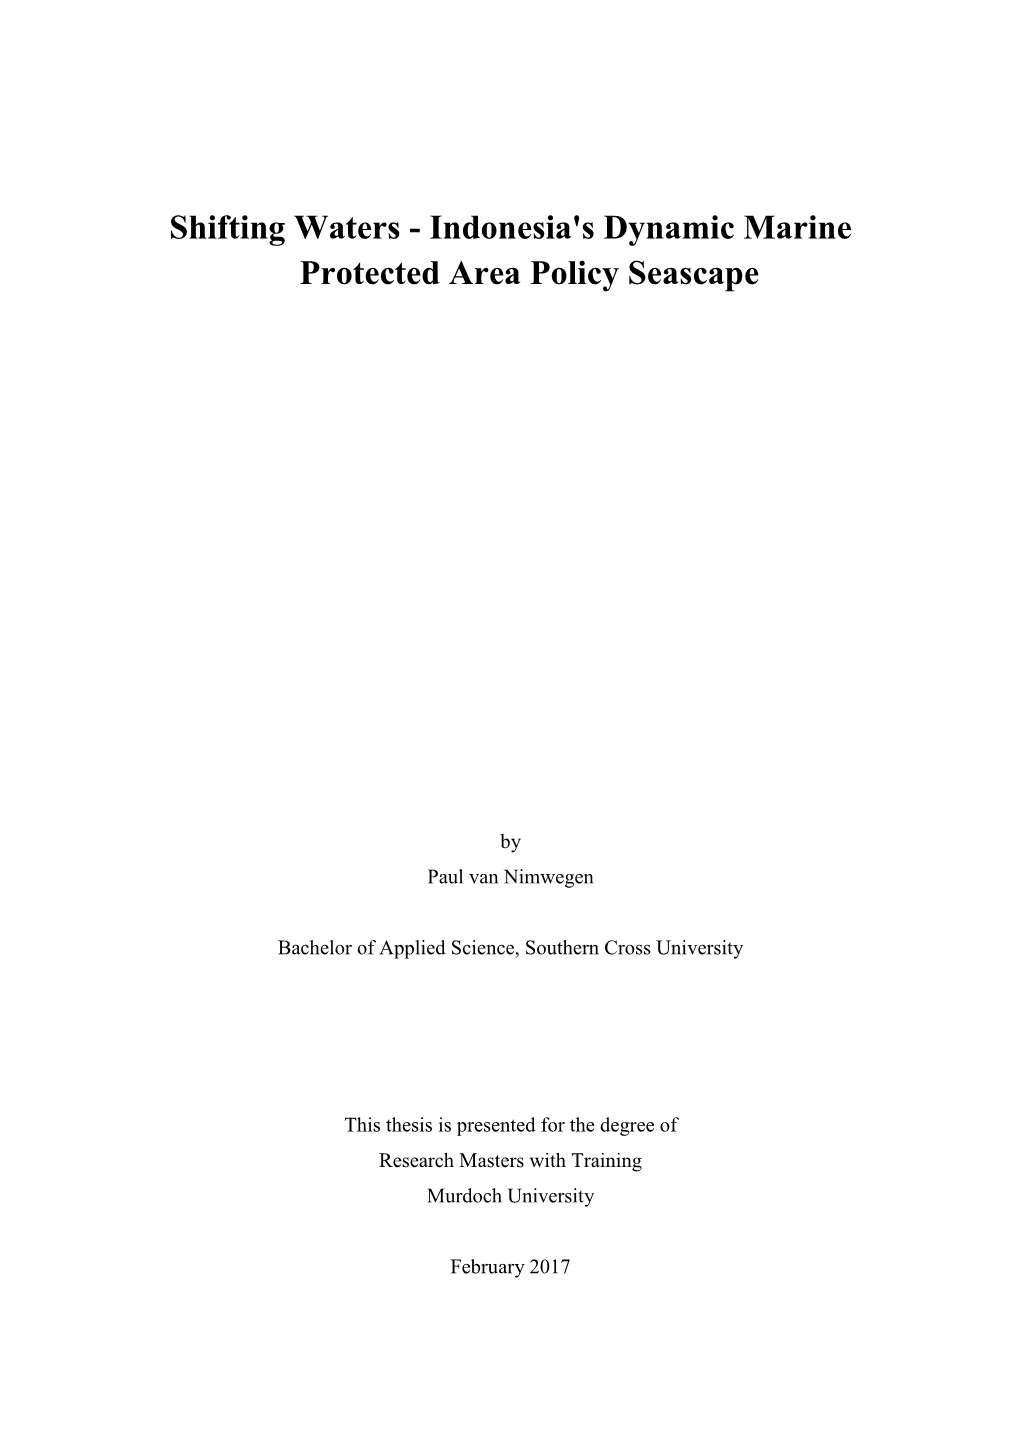 Indonesia's Dynamic Marine Protected Area Policy Seascape